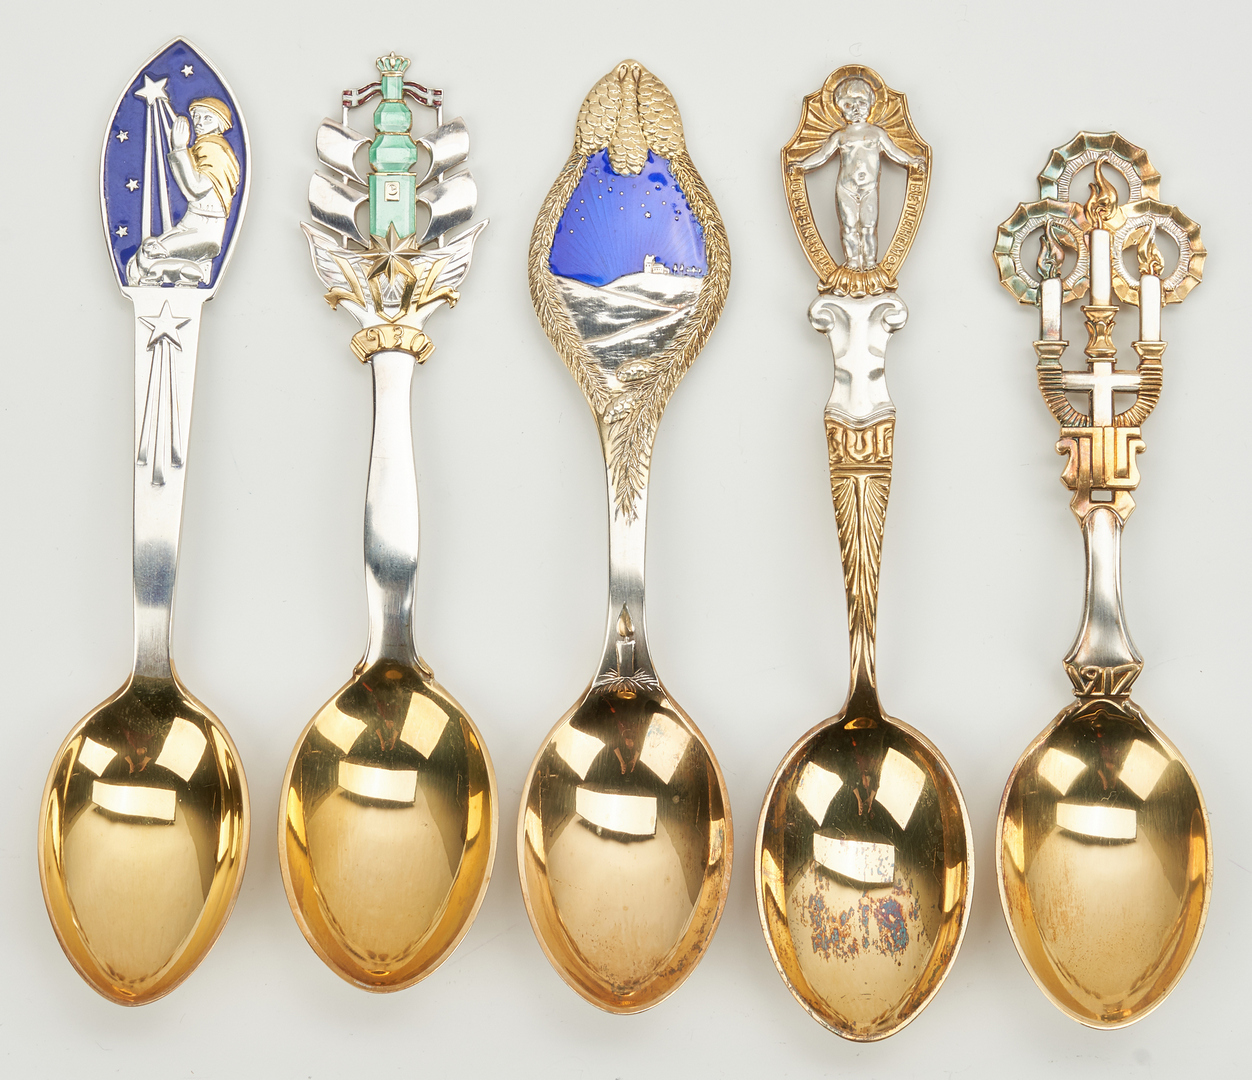 Lot 440: 29 A. Michelsen Gilded Sterling Silver Spoons, 1910-1938